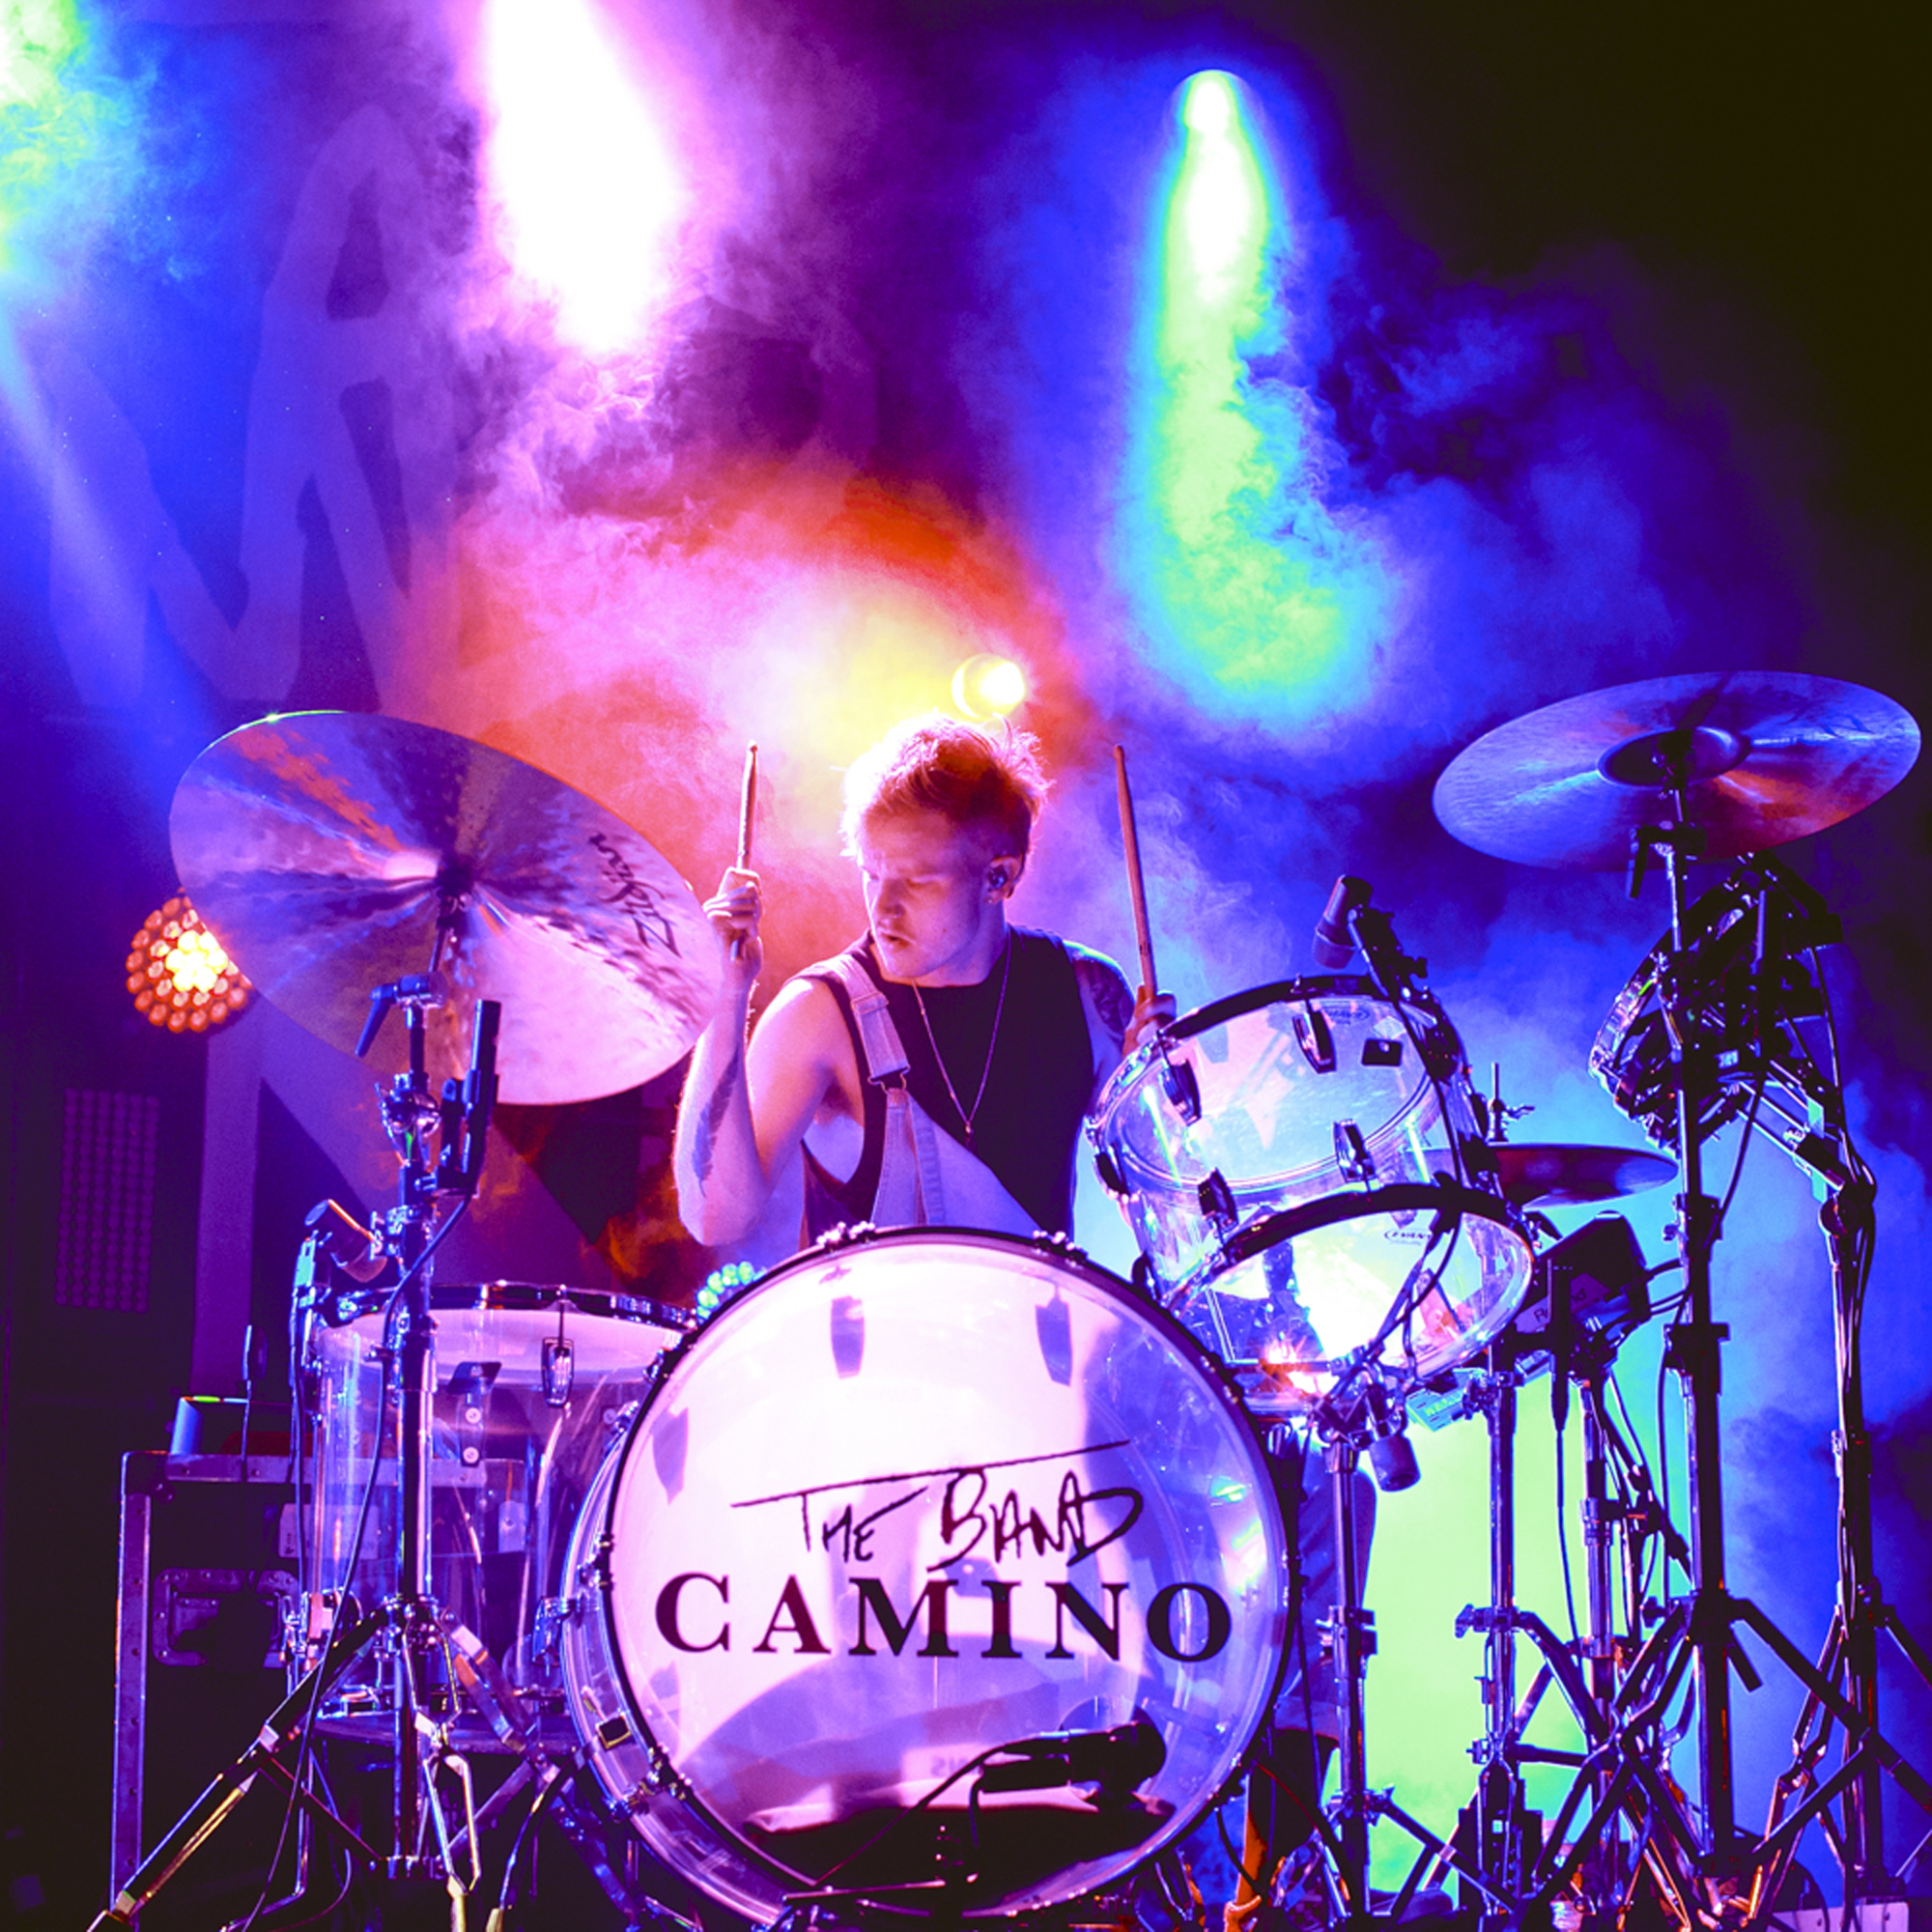 LIVE REVIEW: The Band CAMINO @ WEBSTER HALL